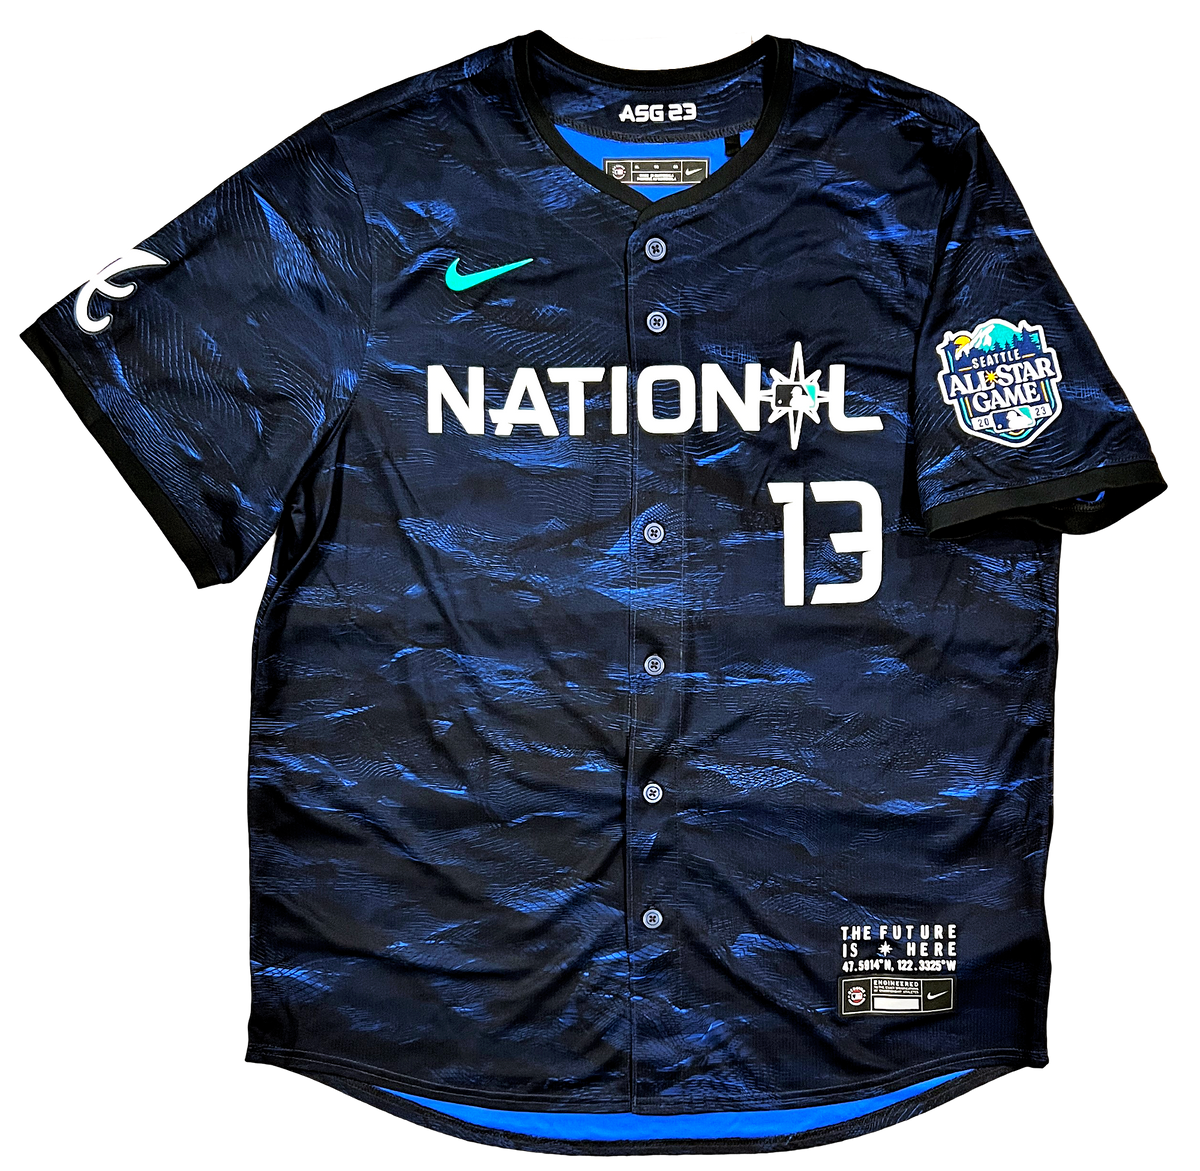 Ronald Acuña Jr. National League 2023 All-Star Game Men's Nike MLB Limited Jersey